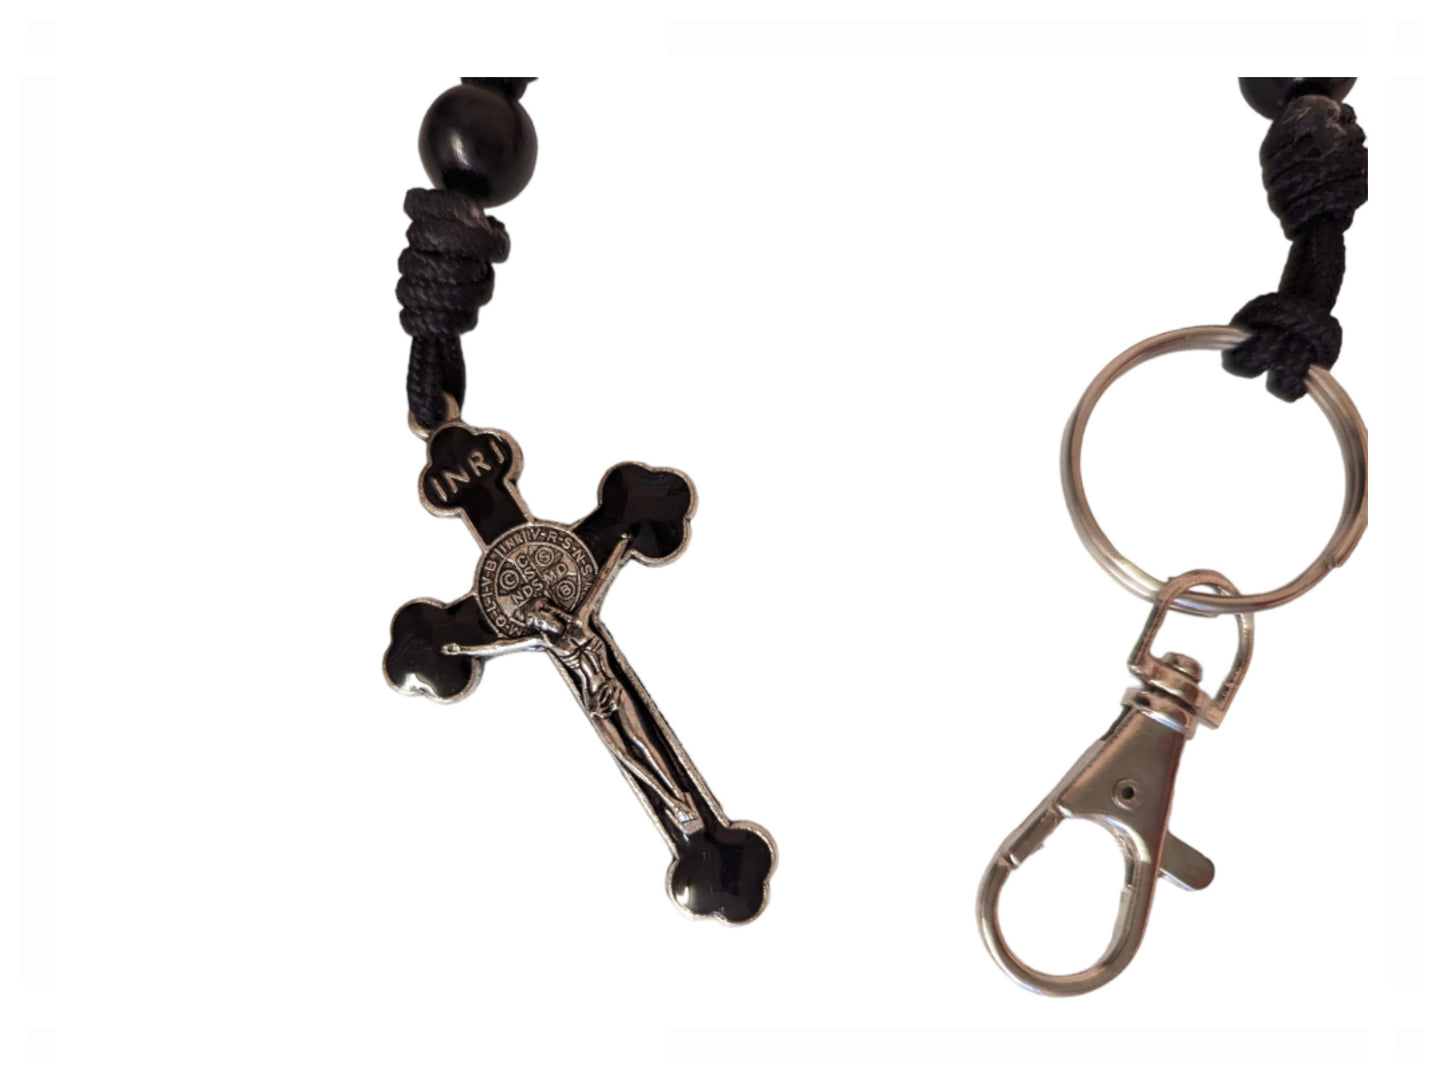 Paracord Black Rosary keyring, Black St Benedict crucifix, One decade metal & knot Rosary, Strong, Catholic Rosary, Pilgrimages, Knotted Rosary, Unbreakable, Waterproof